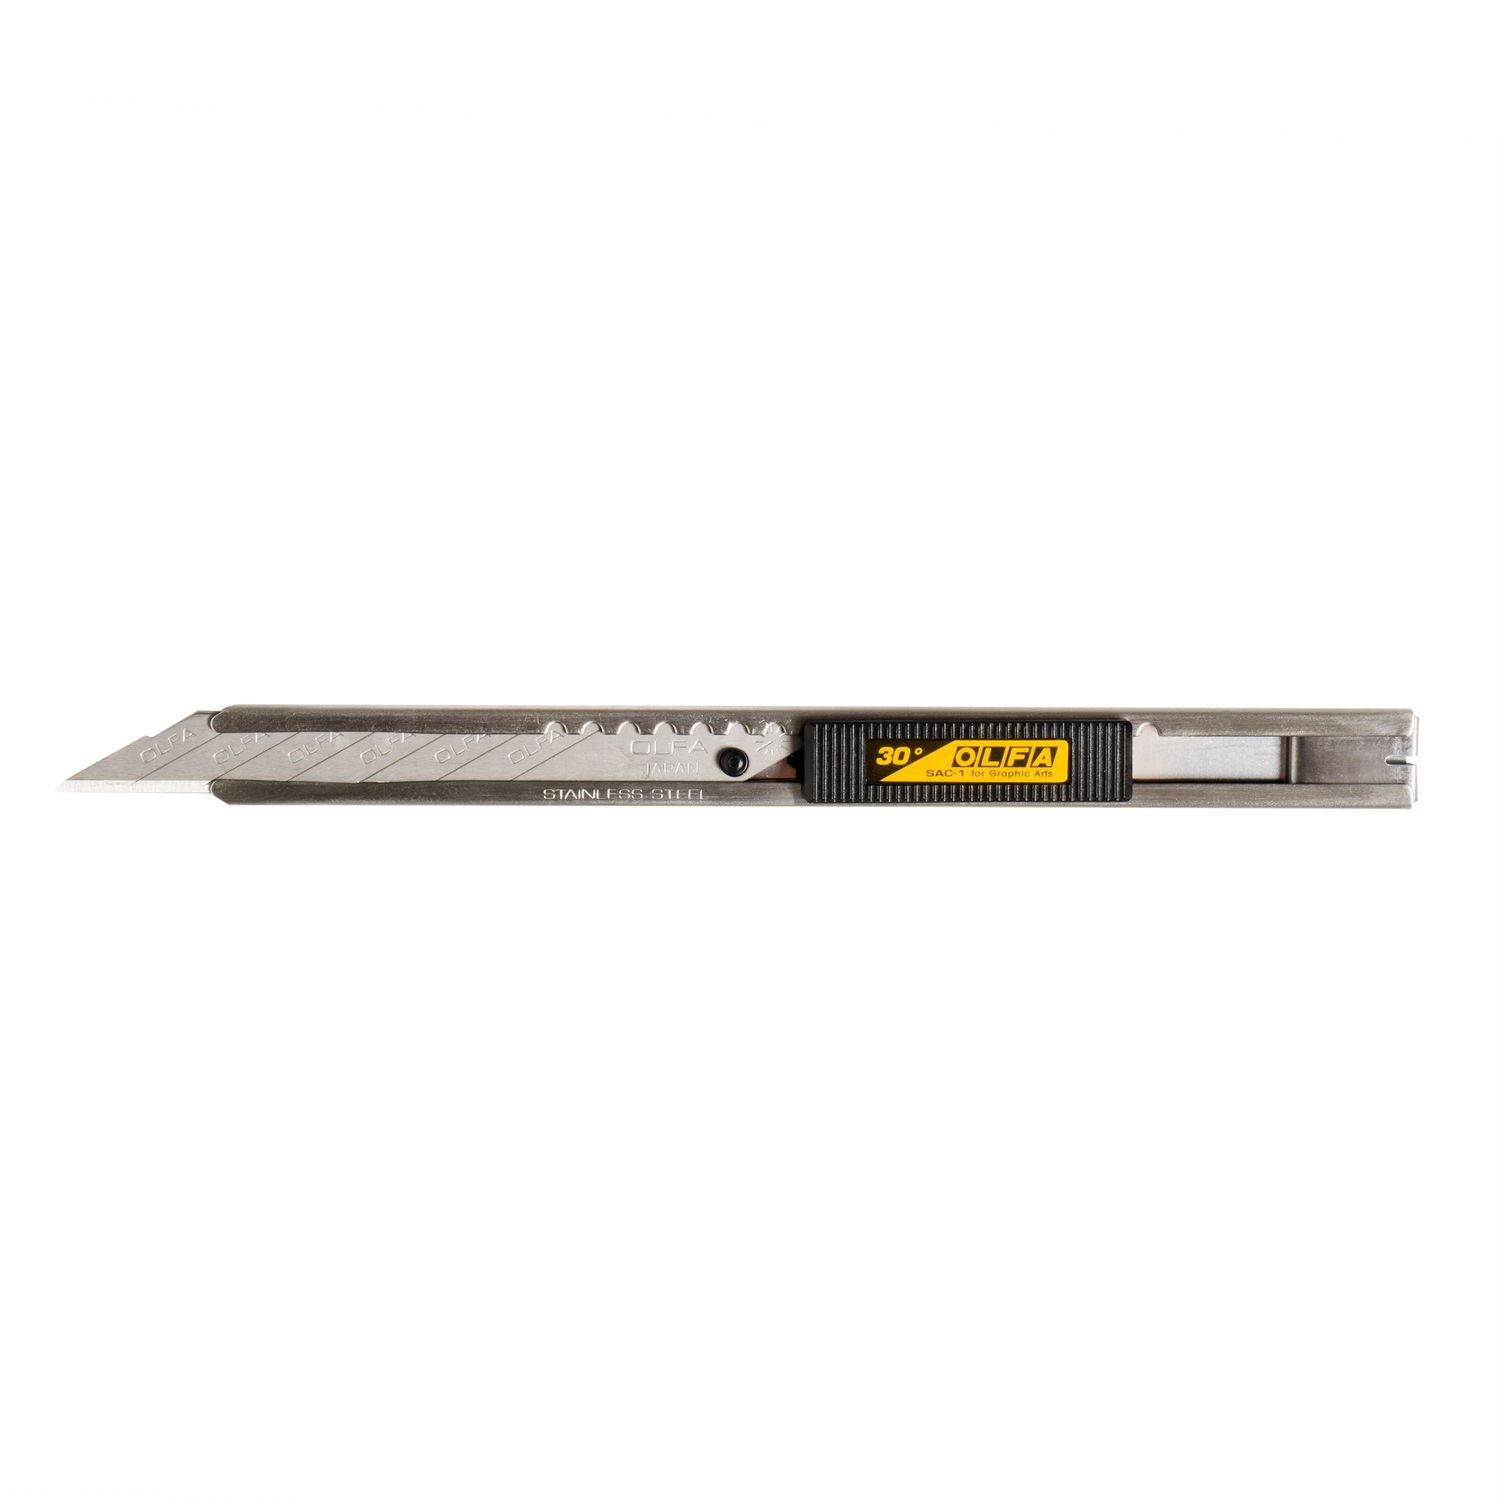 OLFA SAC-1 STAINLESS STEEL SNAP-OFF GRAPHICS KNIFE